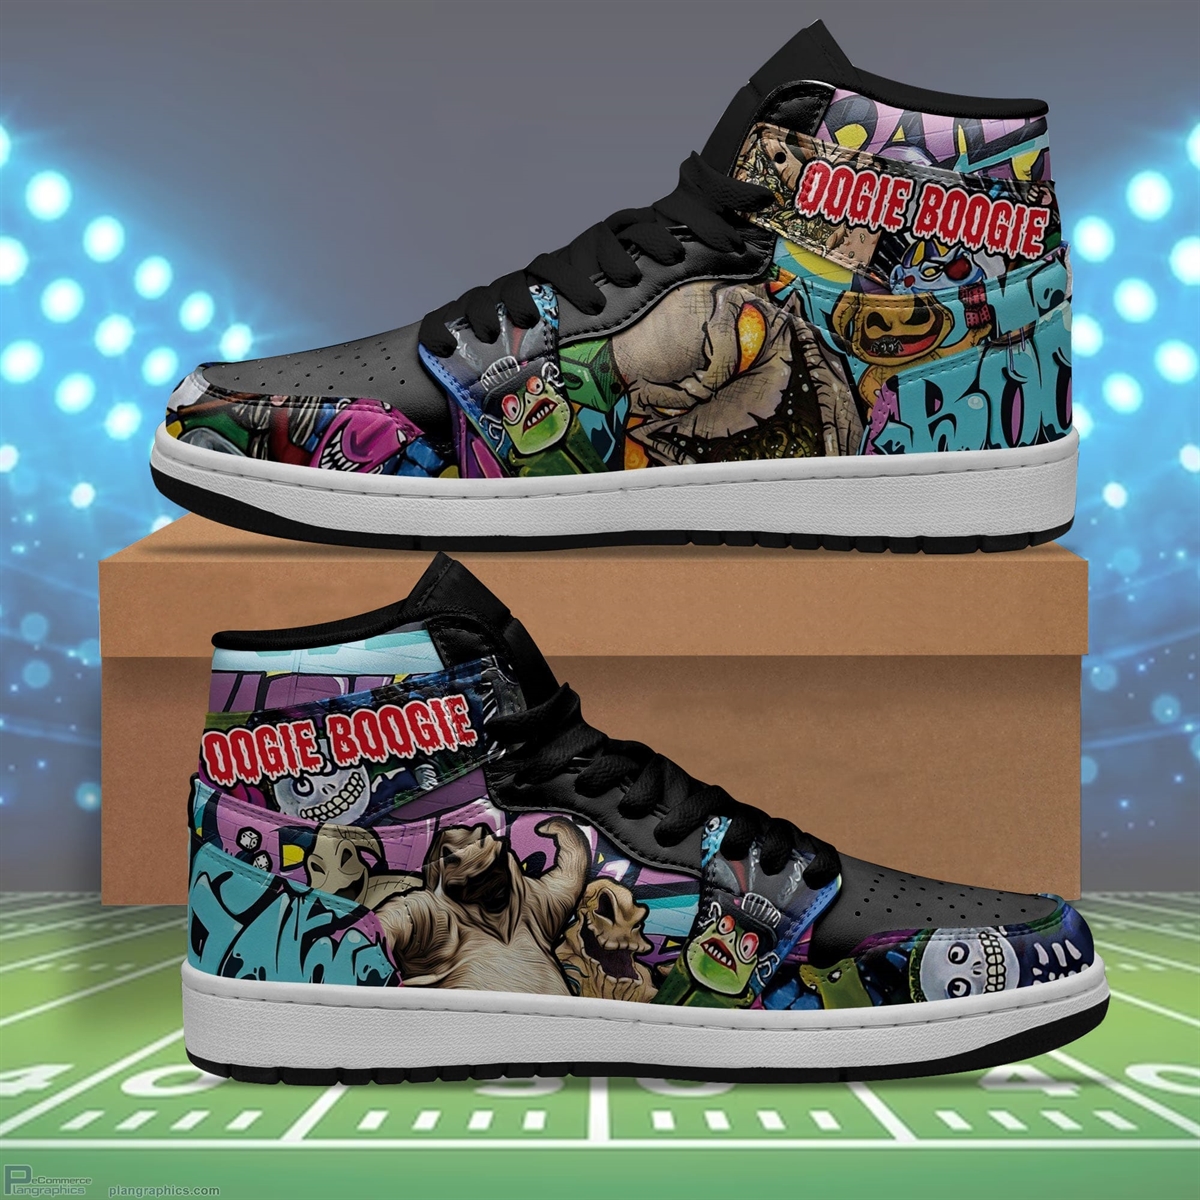 Oogie Boogie JD Sneakers Custom Shoes For Fans